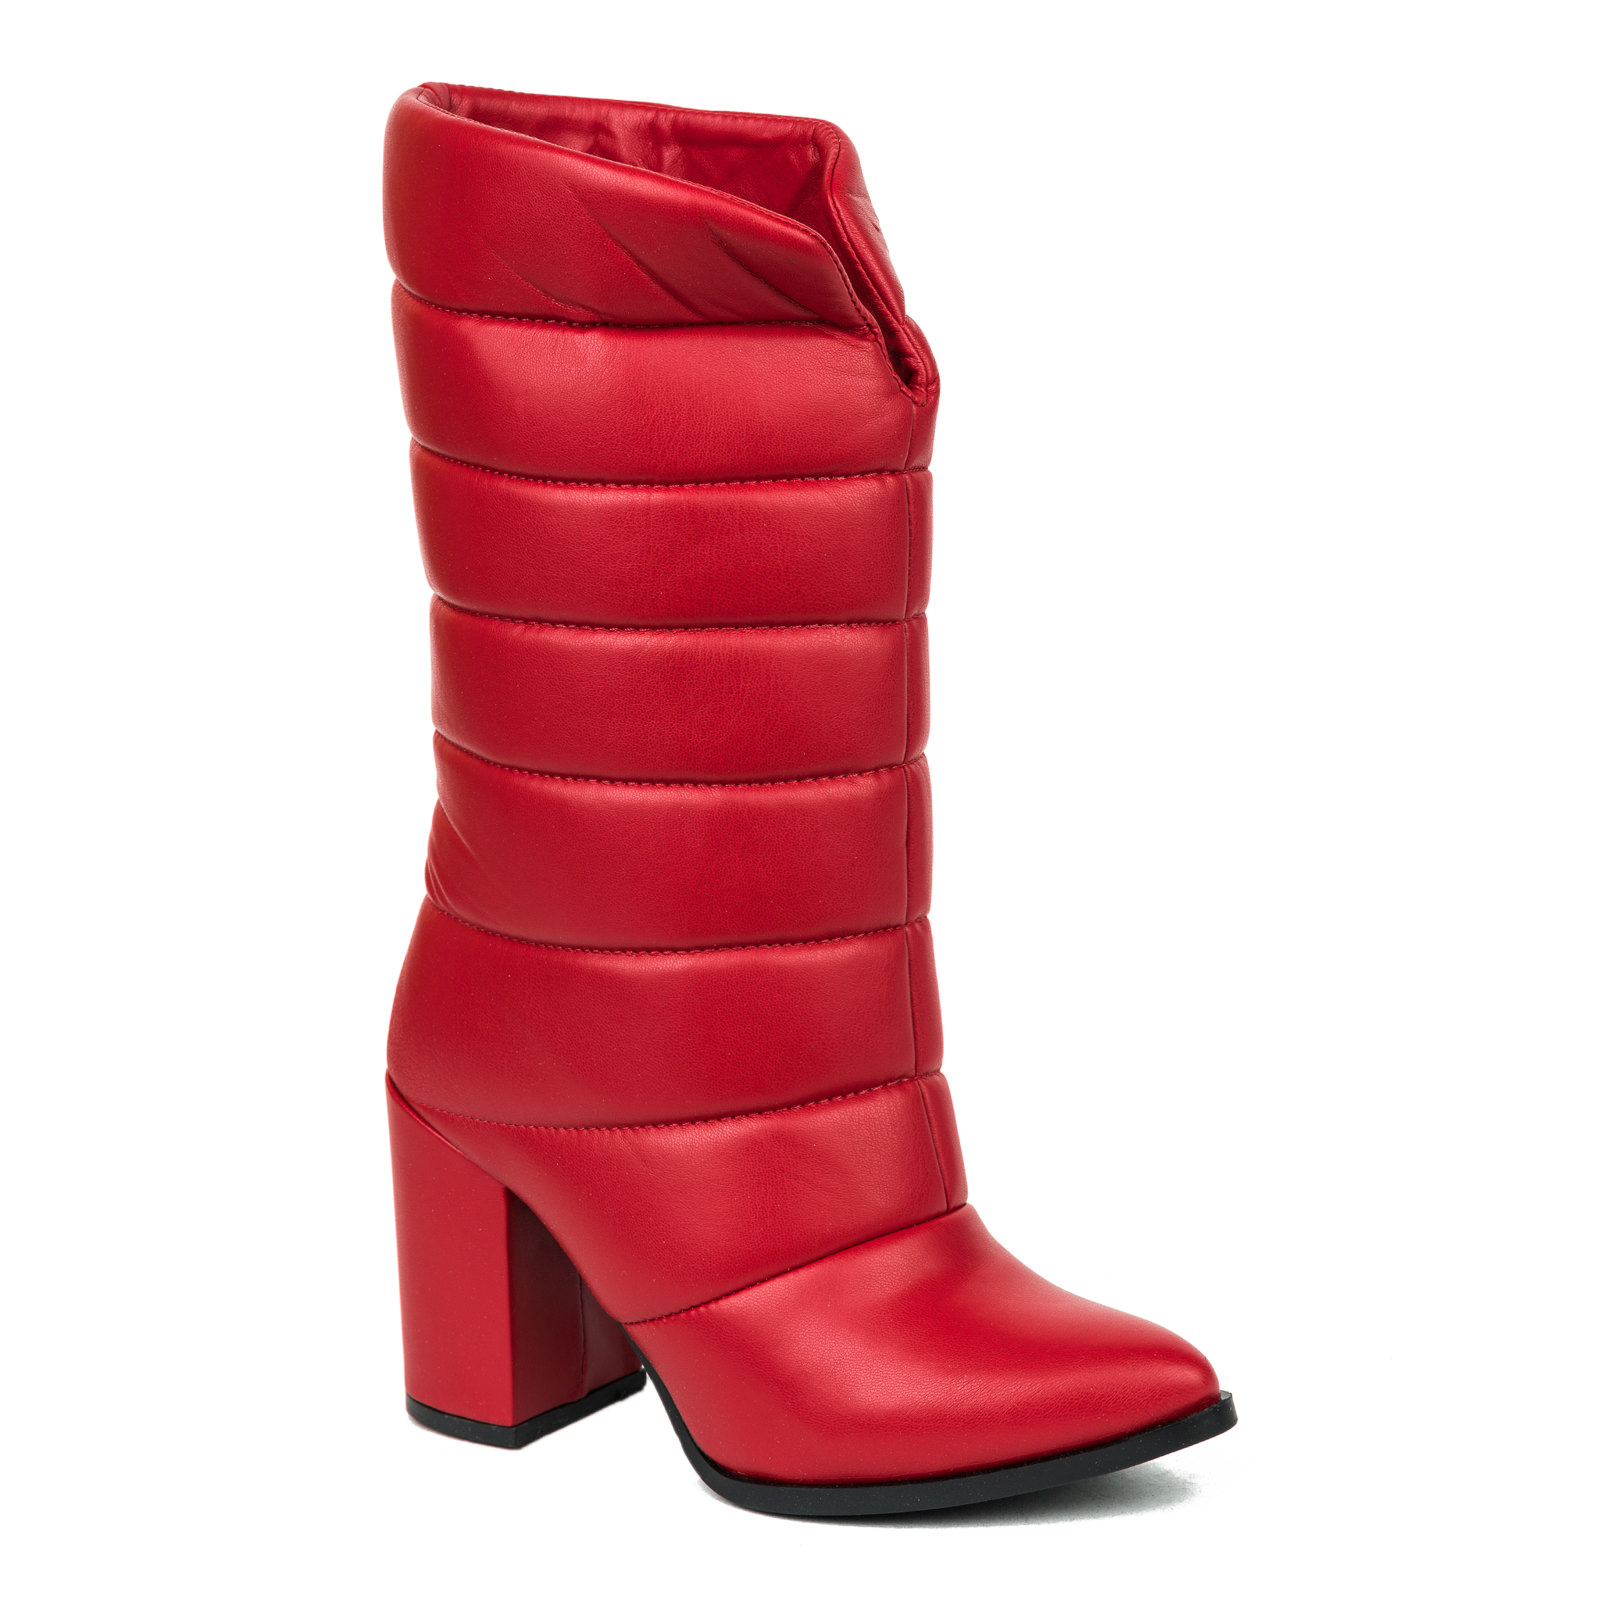 Women ankle boots B139 - RED